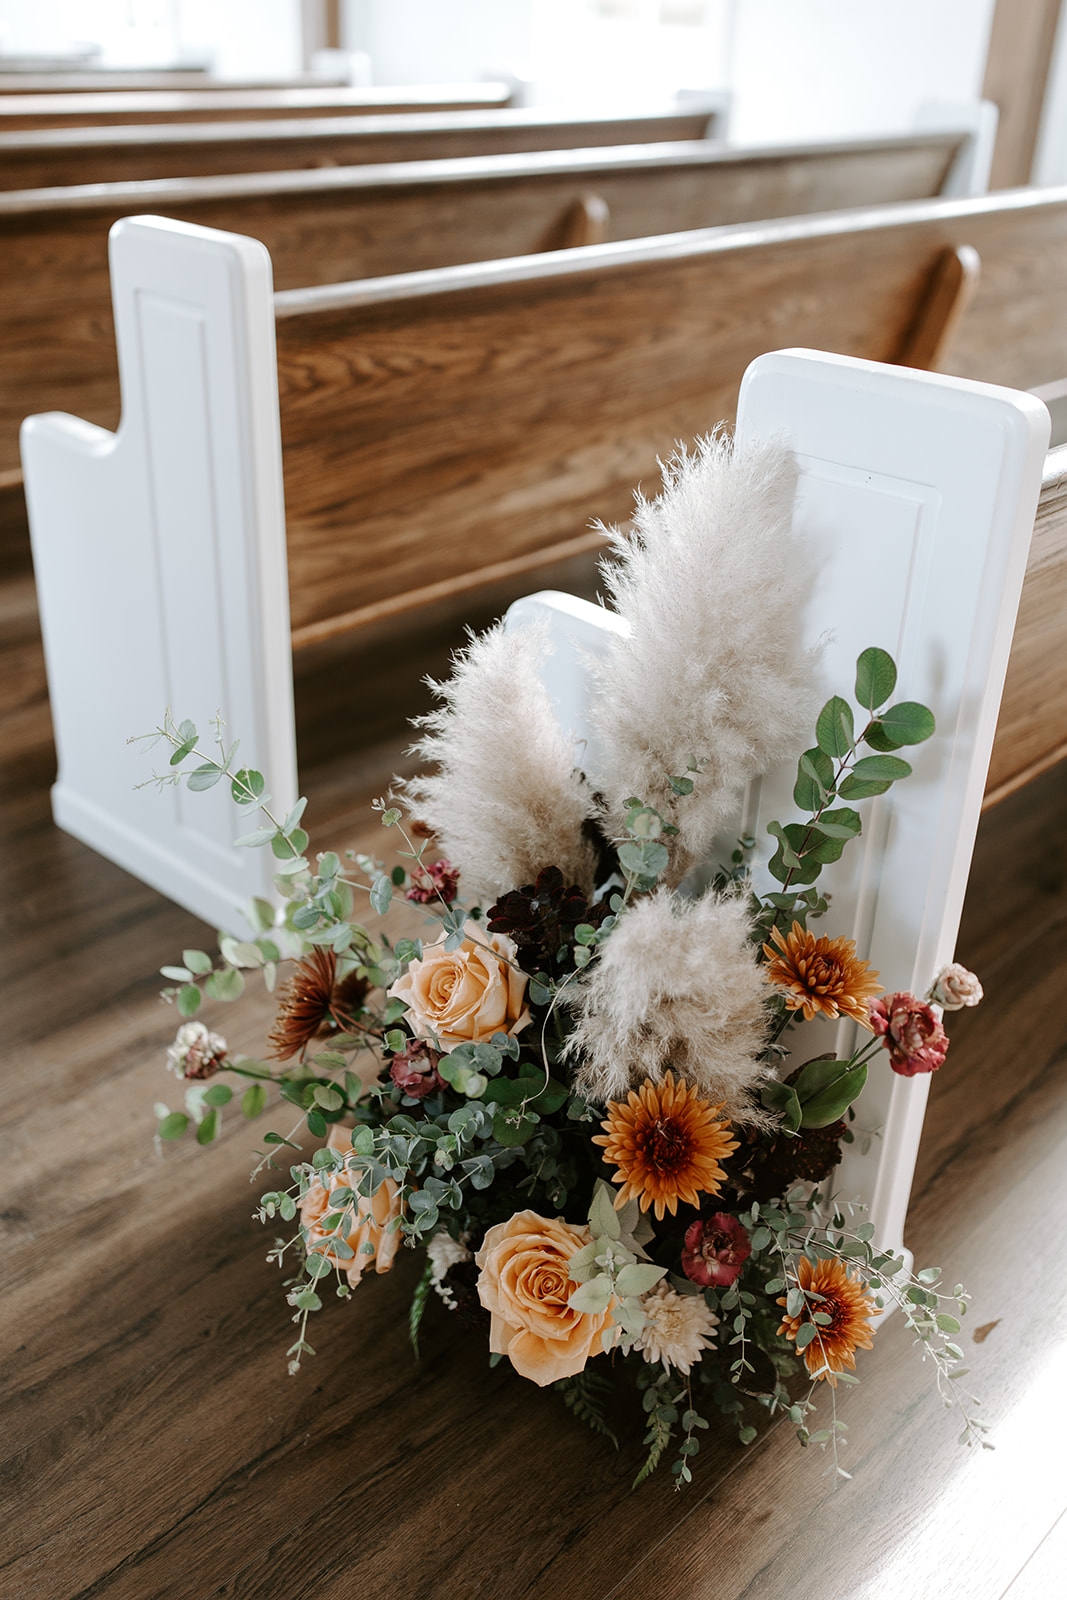 Tennessee Chapel Destination Wedding with Thoughtful Details